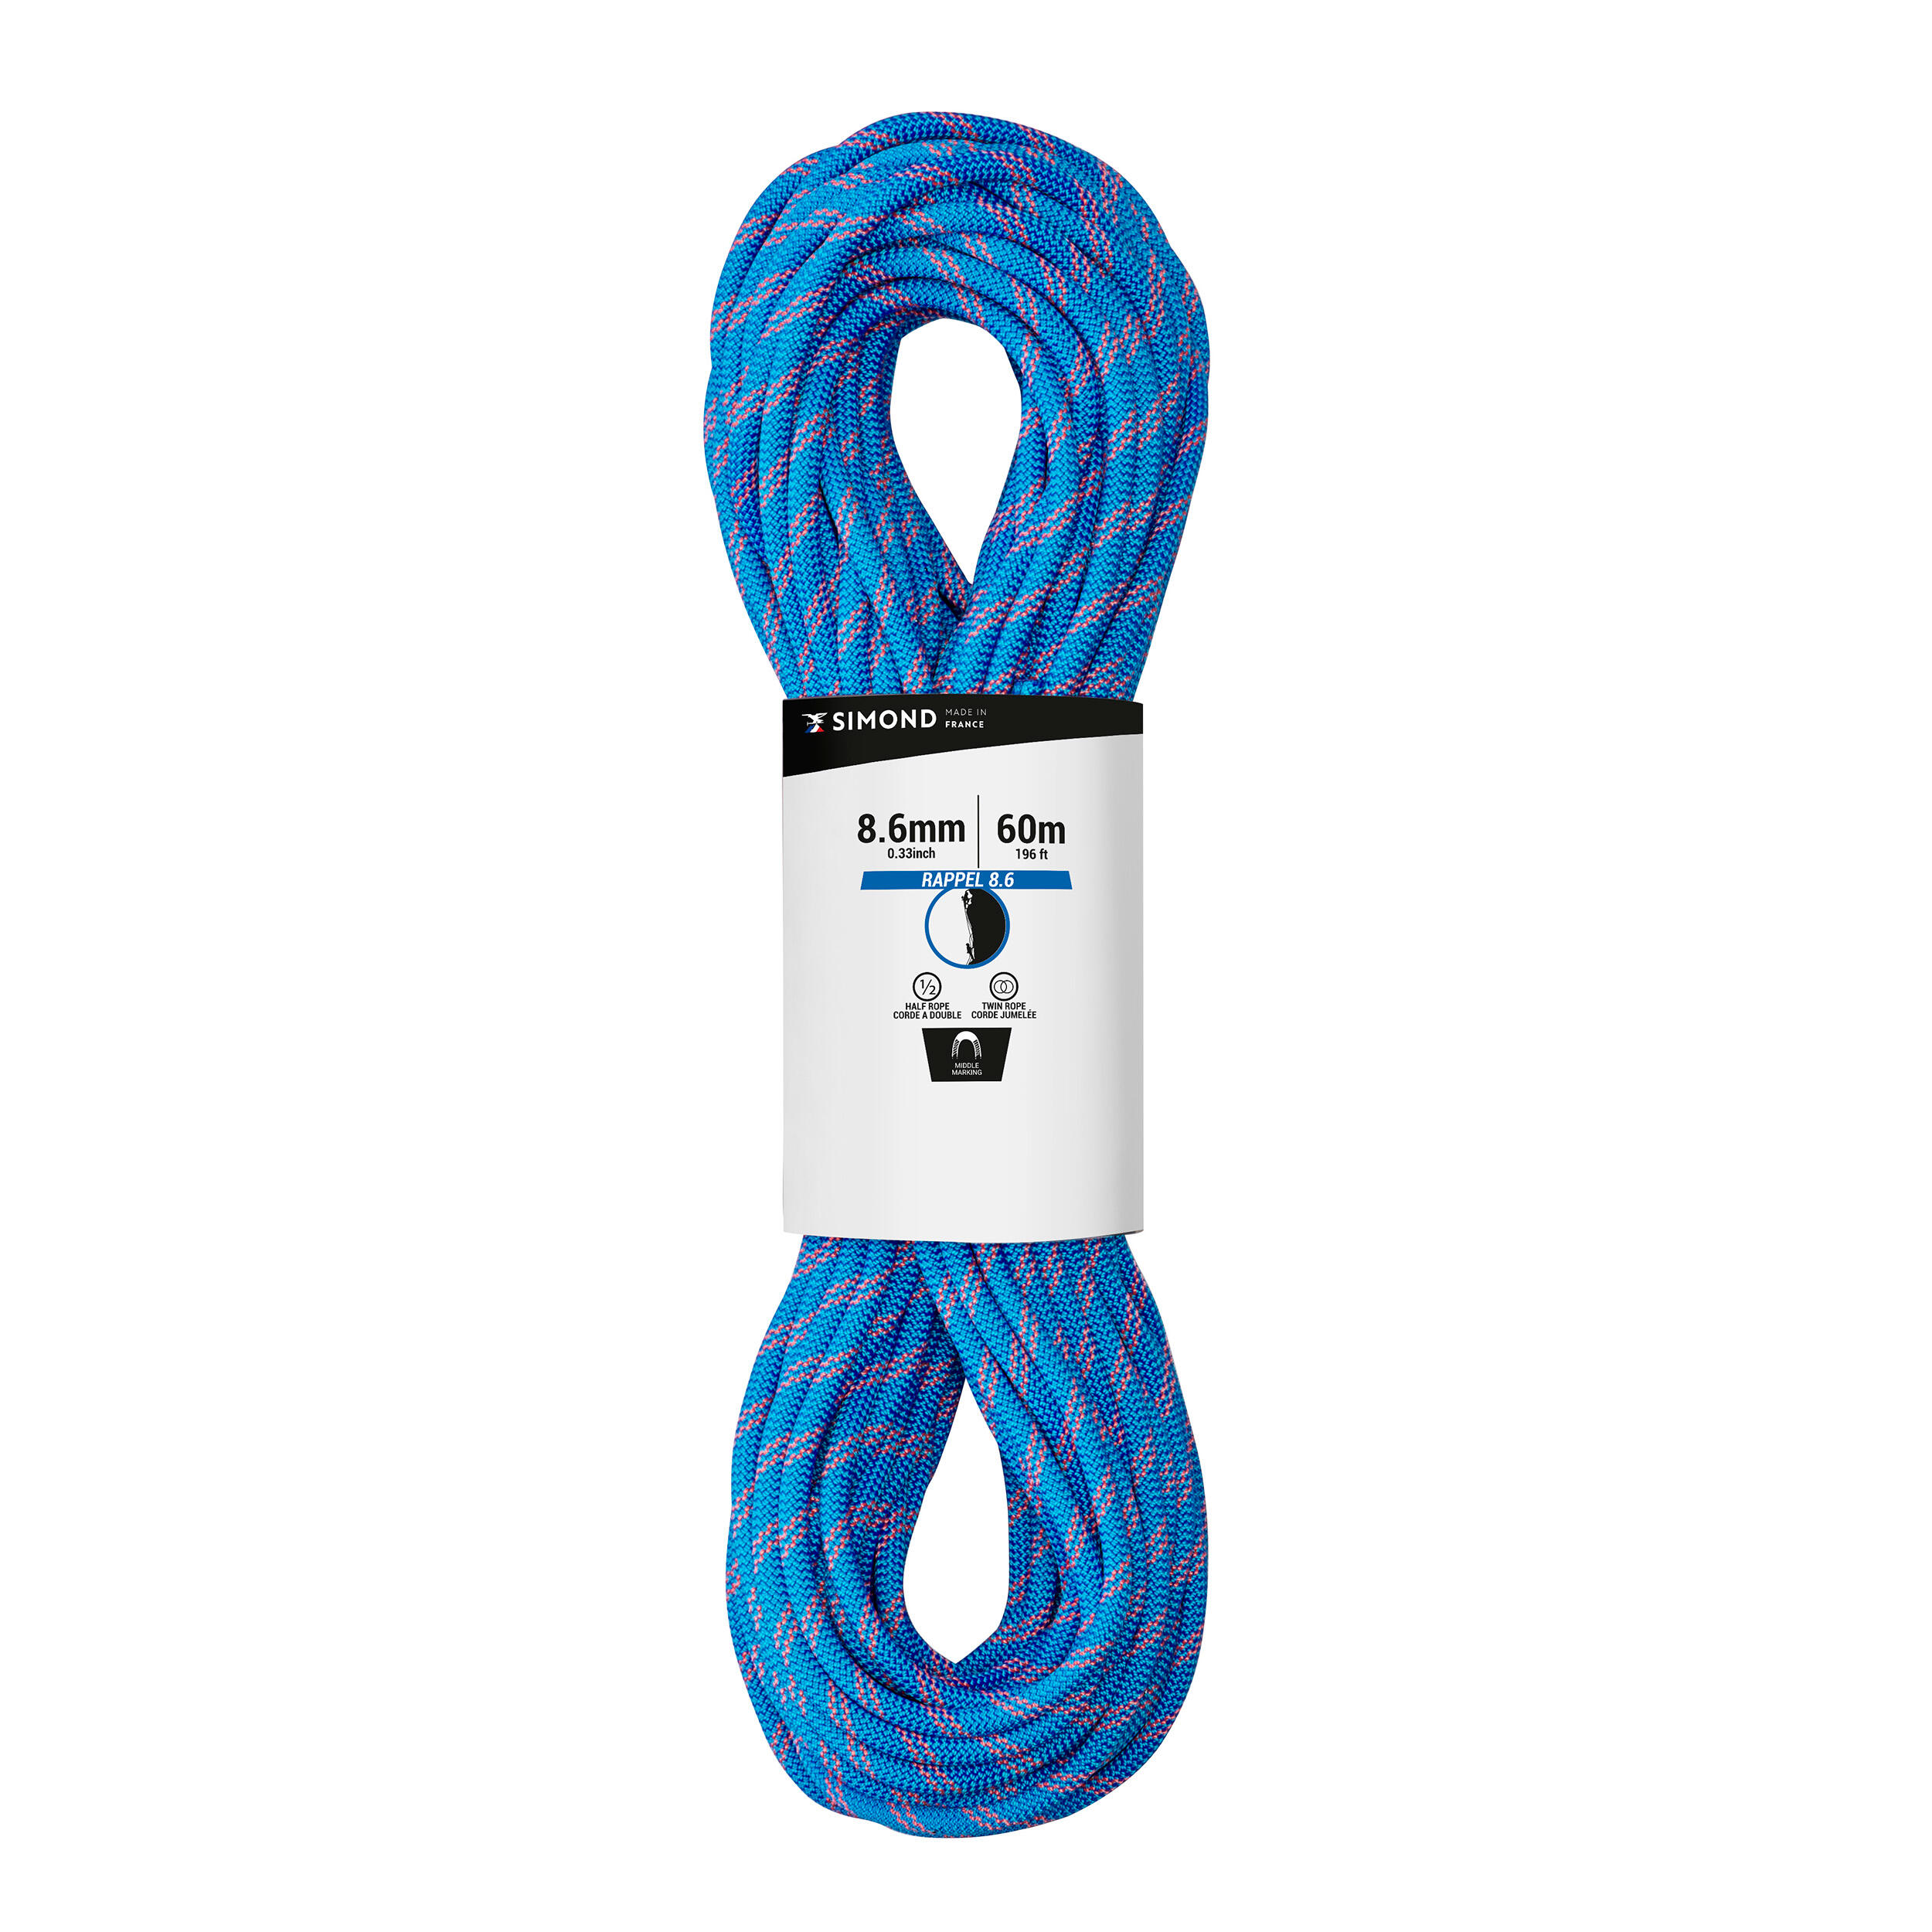 Double climbing and mountaineering rope 8.6 mm x 60 m - RAPPEL 8.6 Blue 1/6